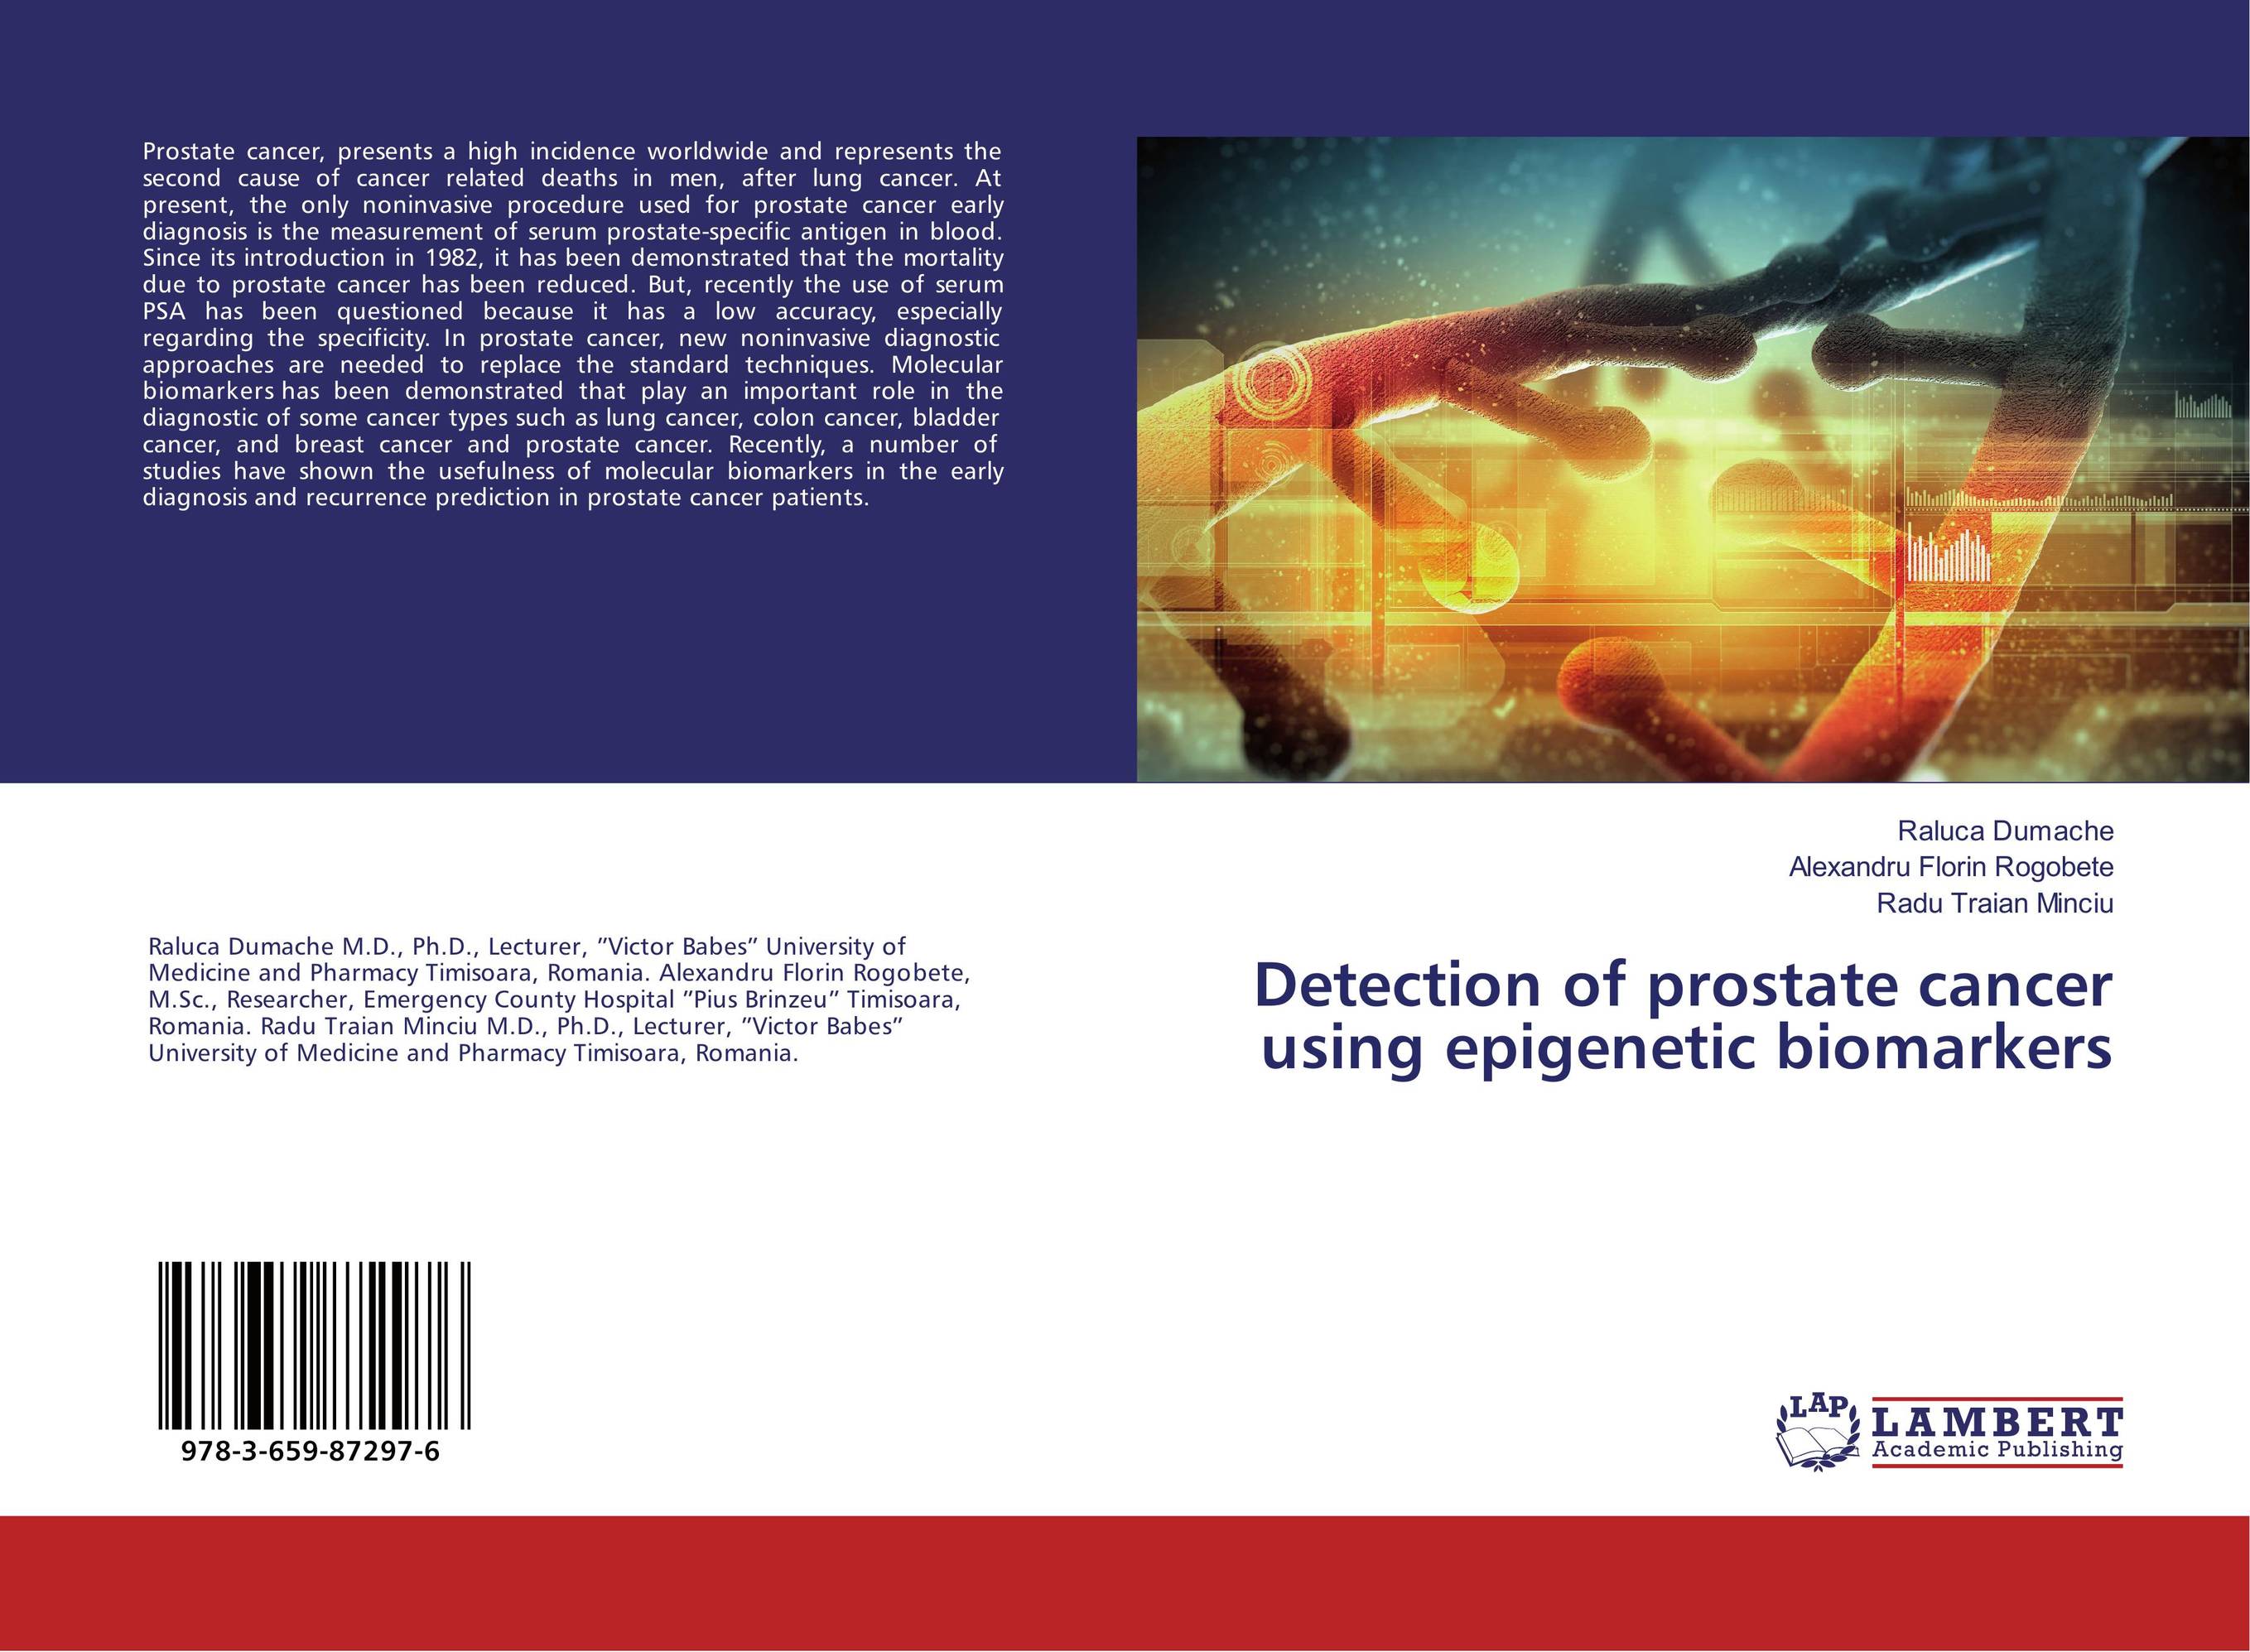 Detection of prostate cancer using epigenetic biomarkers